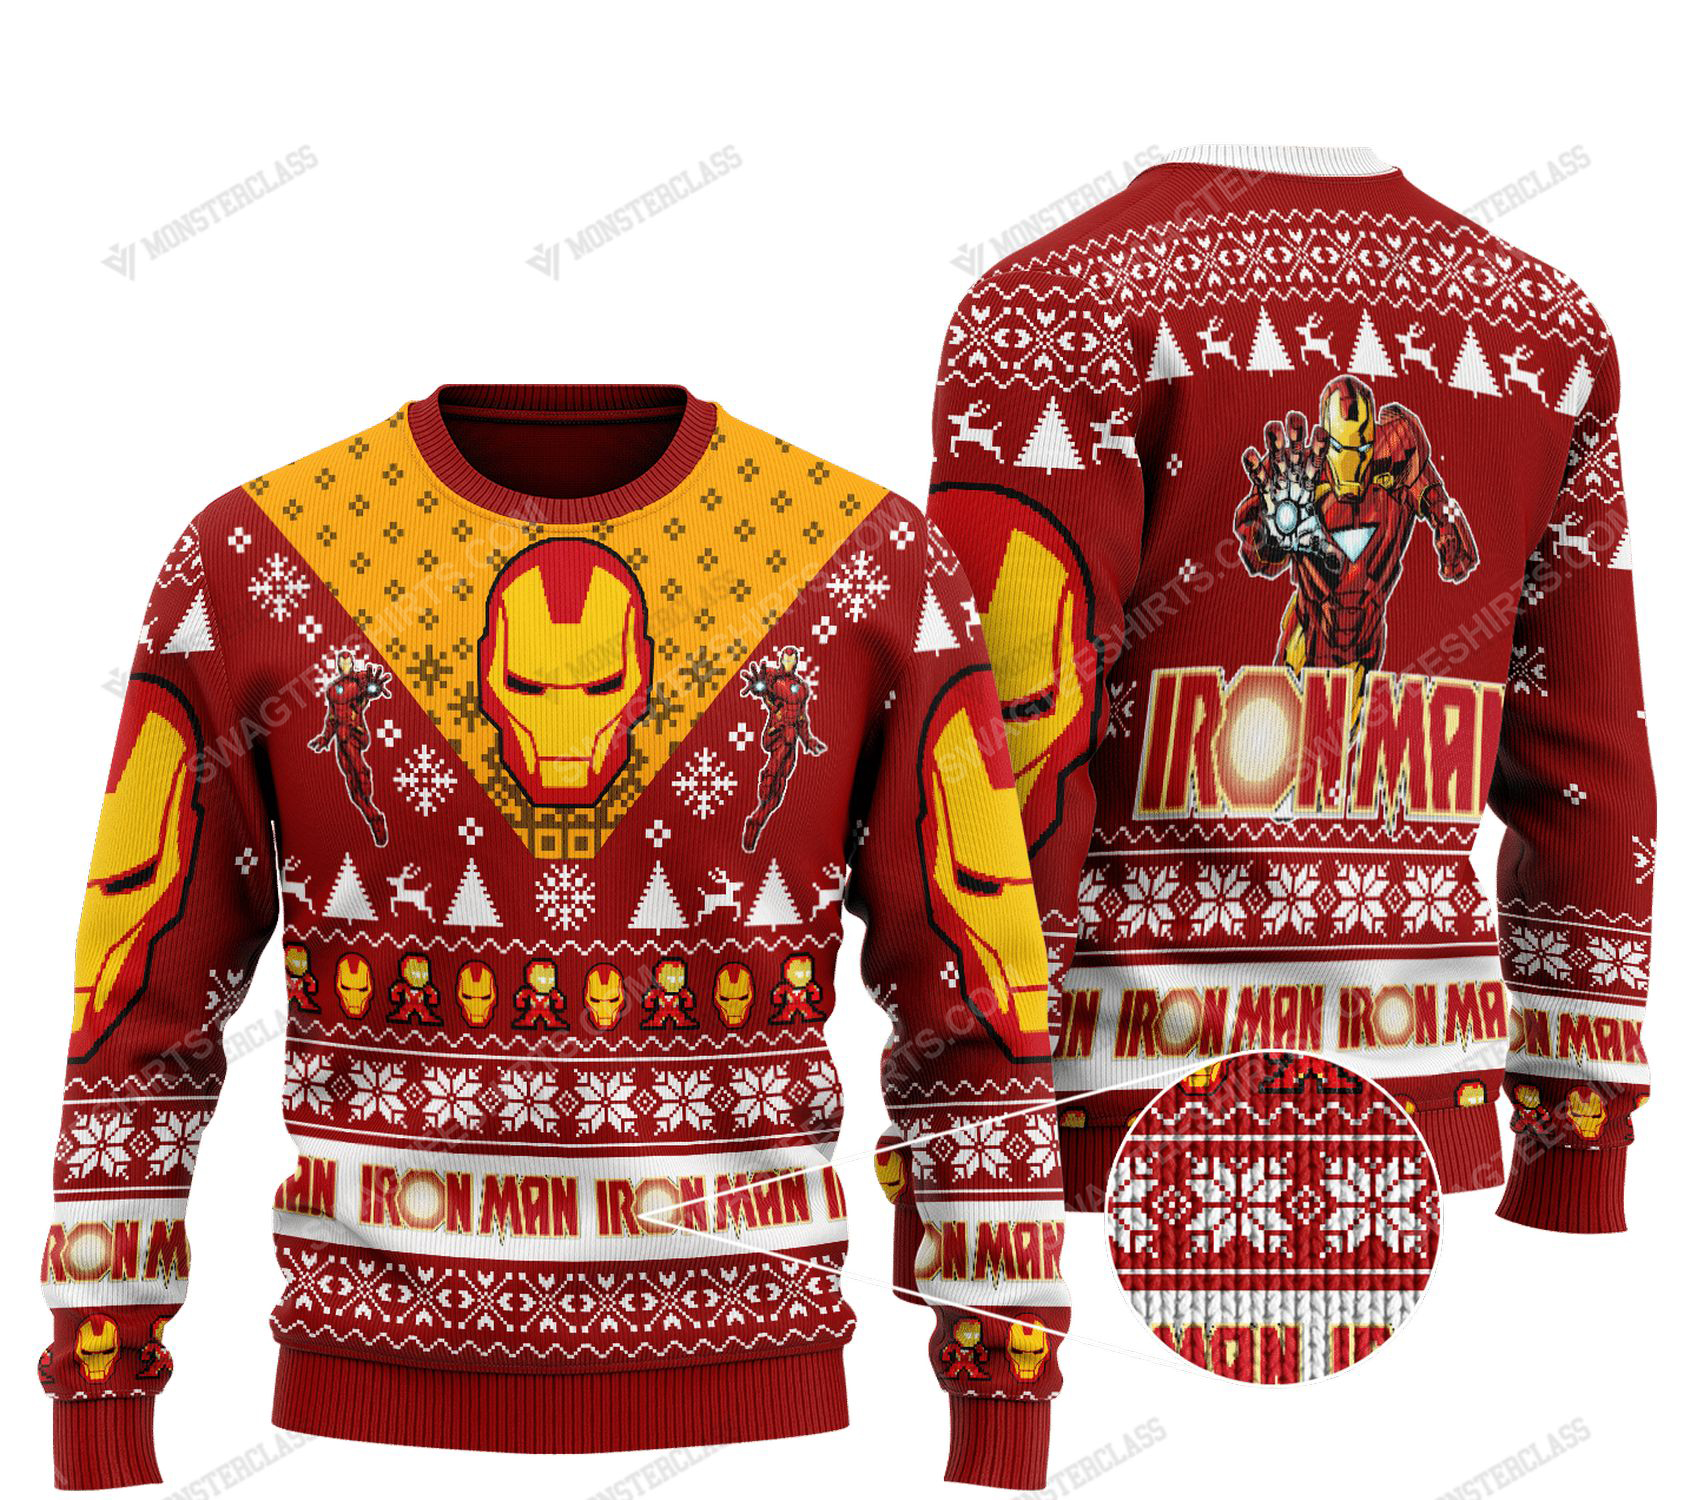 Iron man marvel all over print ugly christmas sweater 1